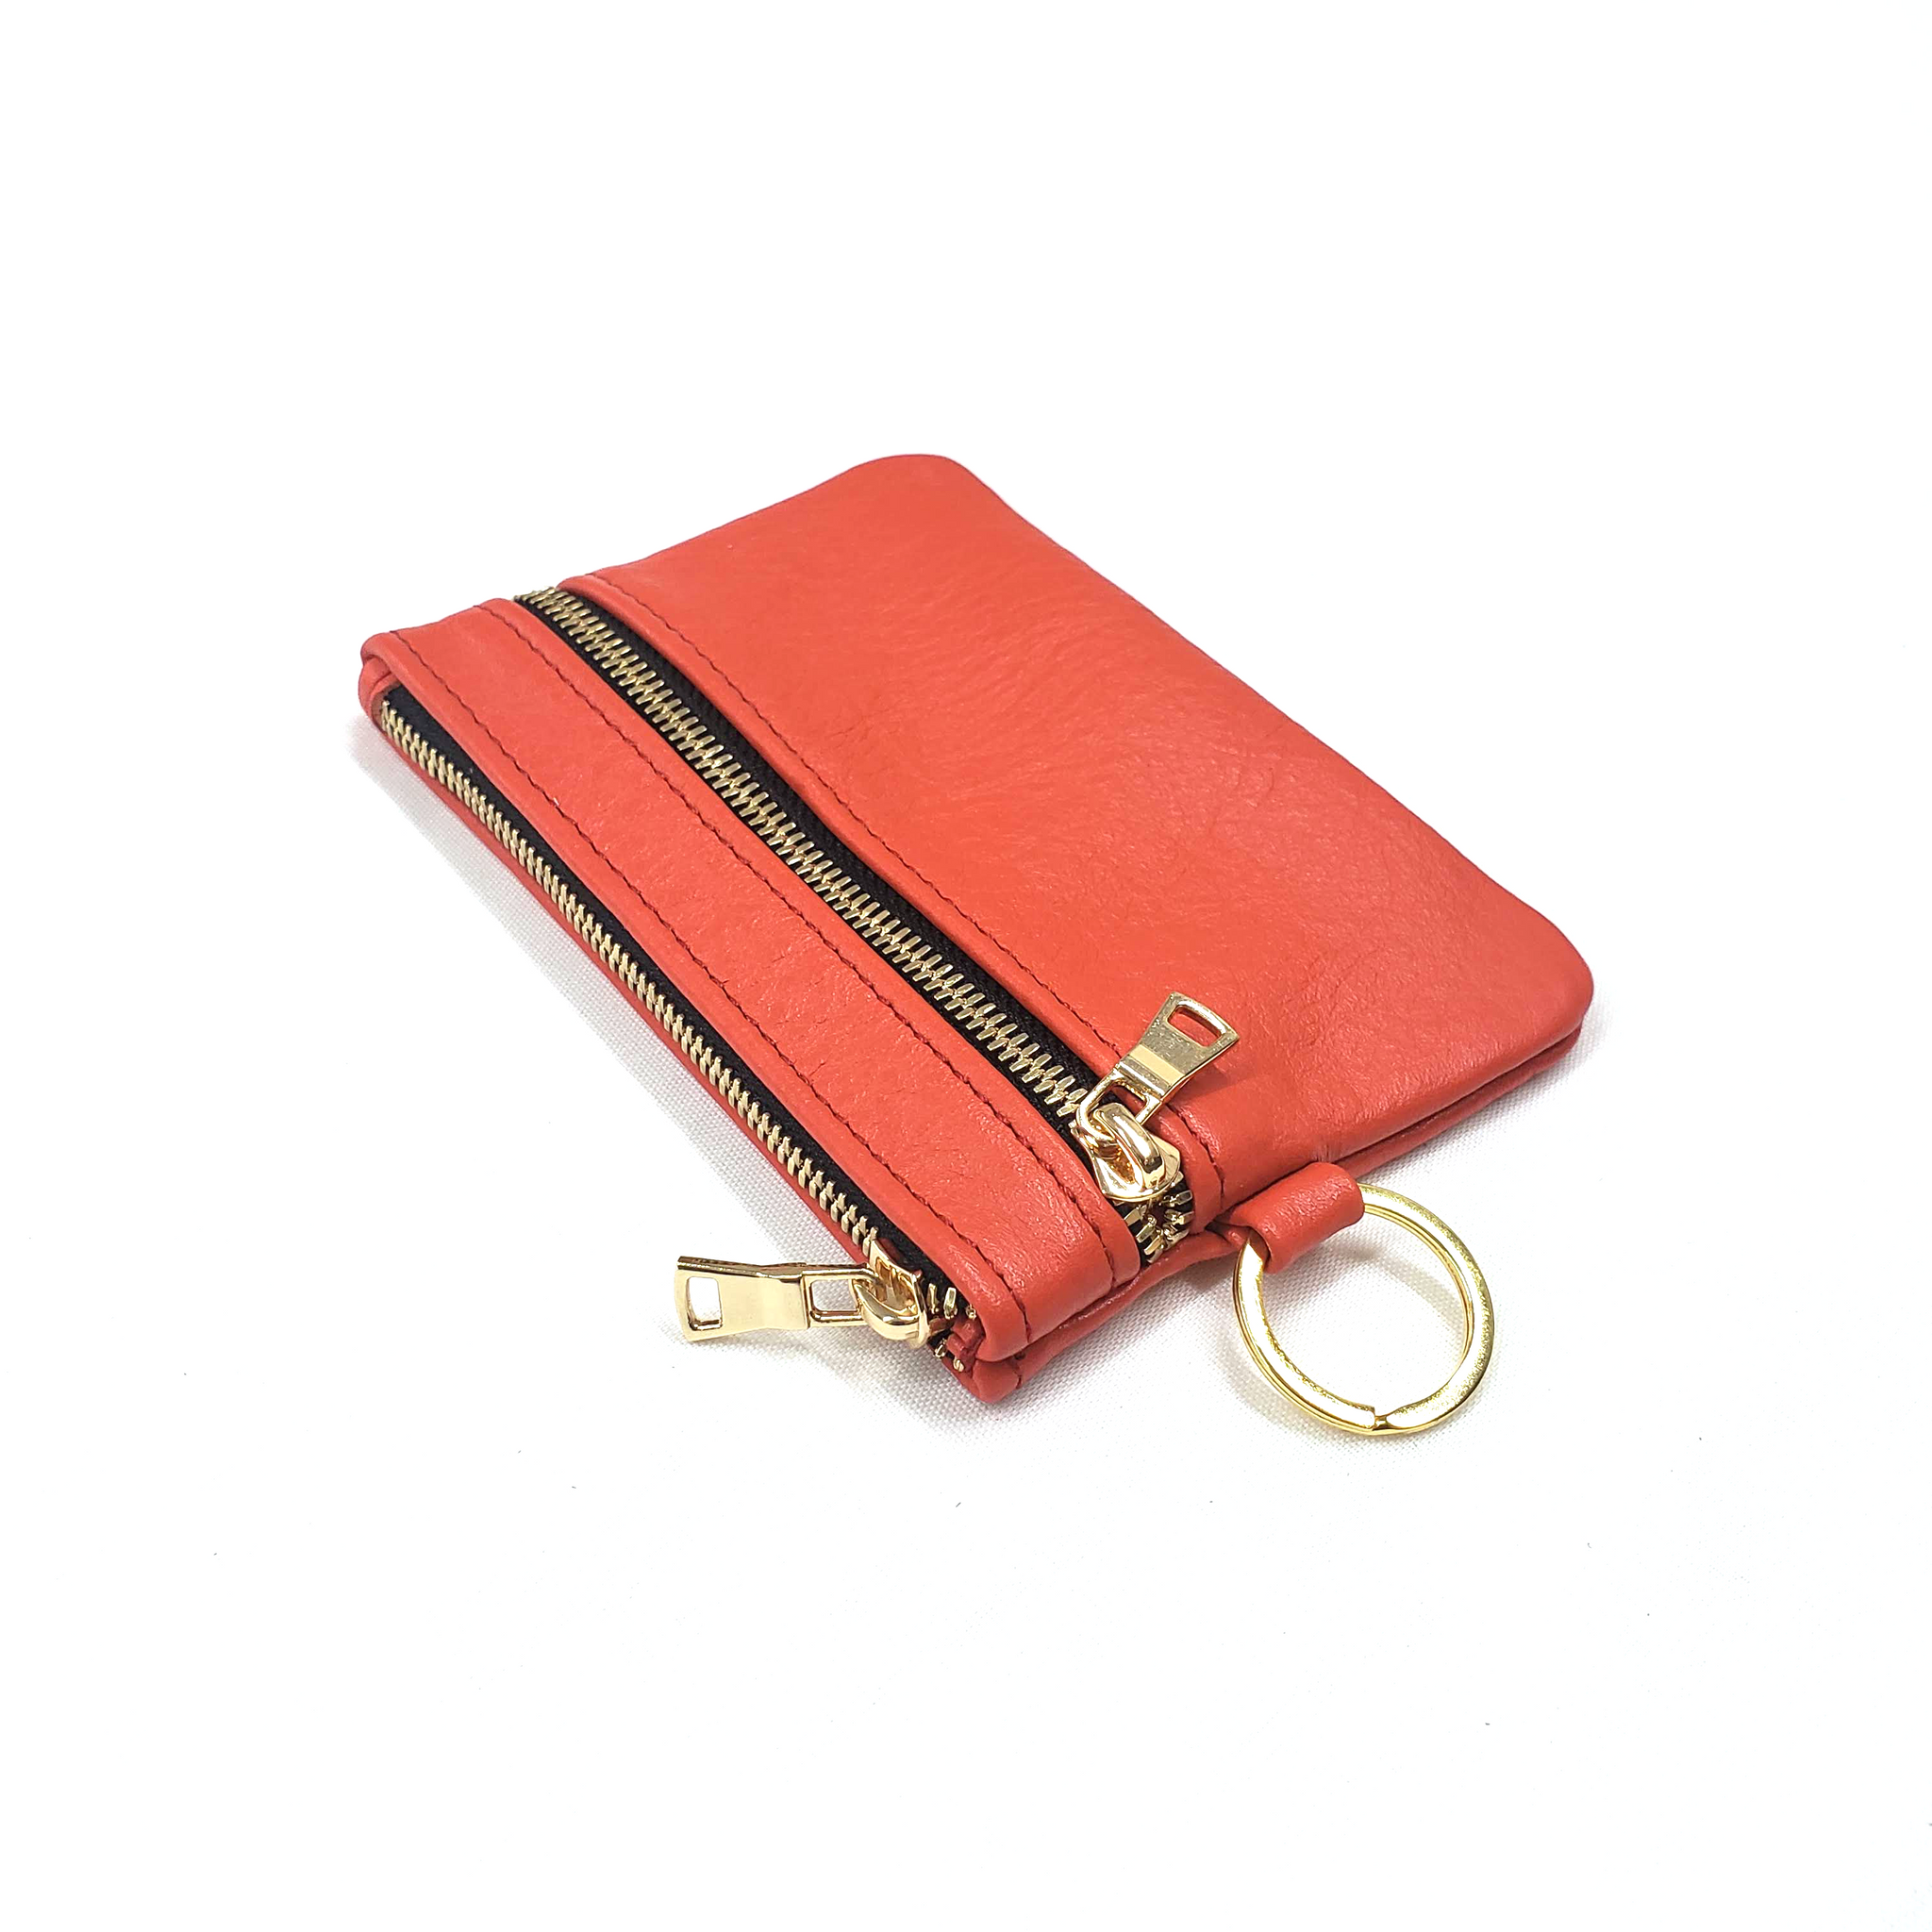 Shop Gabee Abril Leather Pouch/Wallet with Detachable Wristlet at Gabee  Online- Bags of difference since 1949